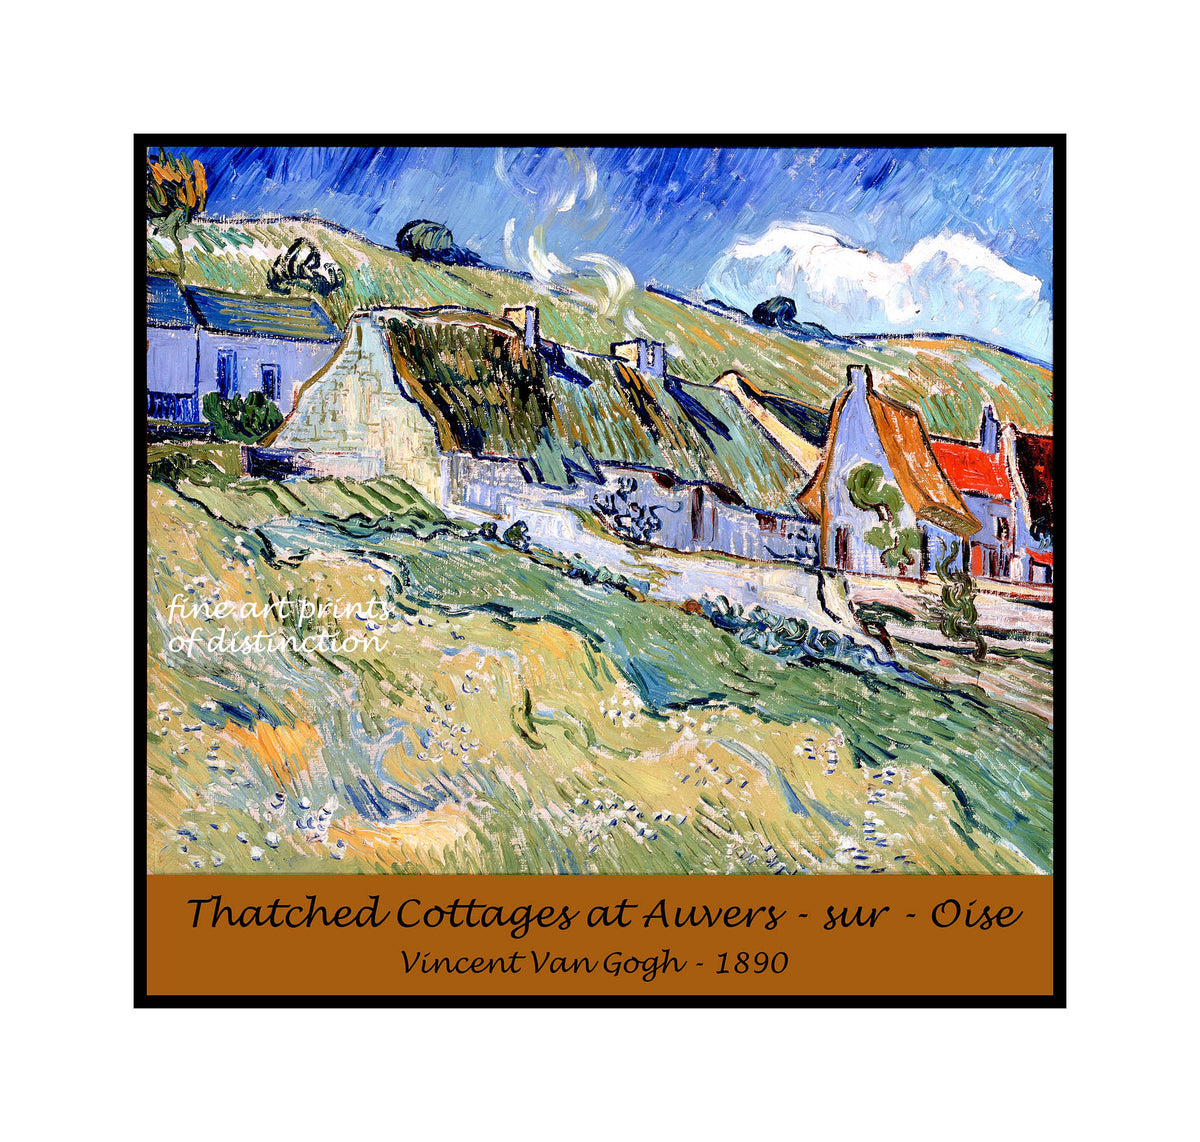 An archival premium Quality art Poster of Thatched Cottages at Auvers - sur - Oise painted by Vincent Van Gogh in May 1890 for sale by Brandywine General Store